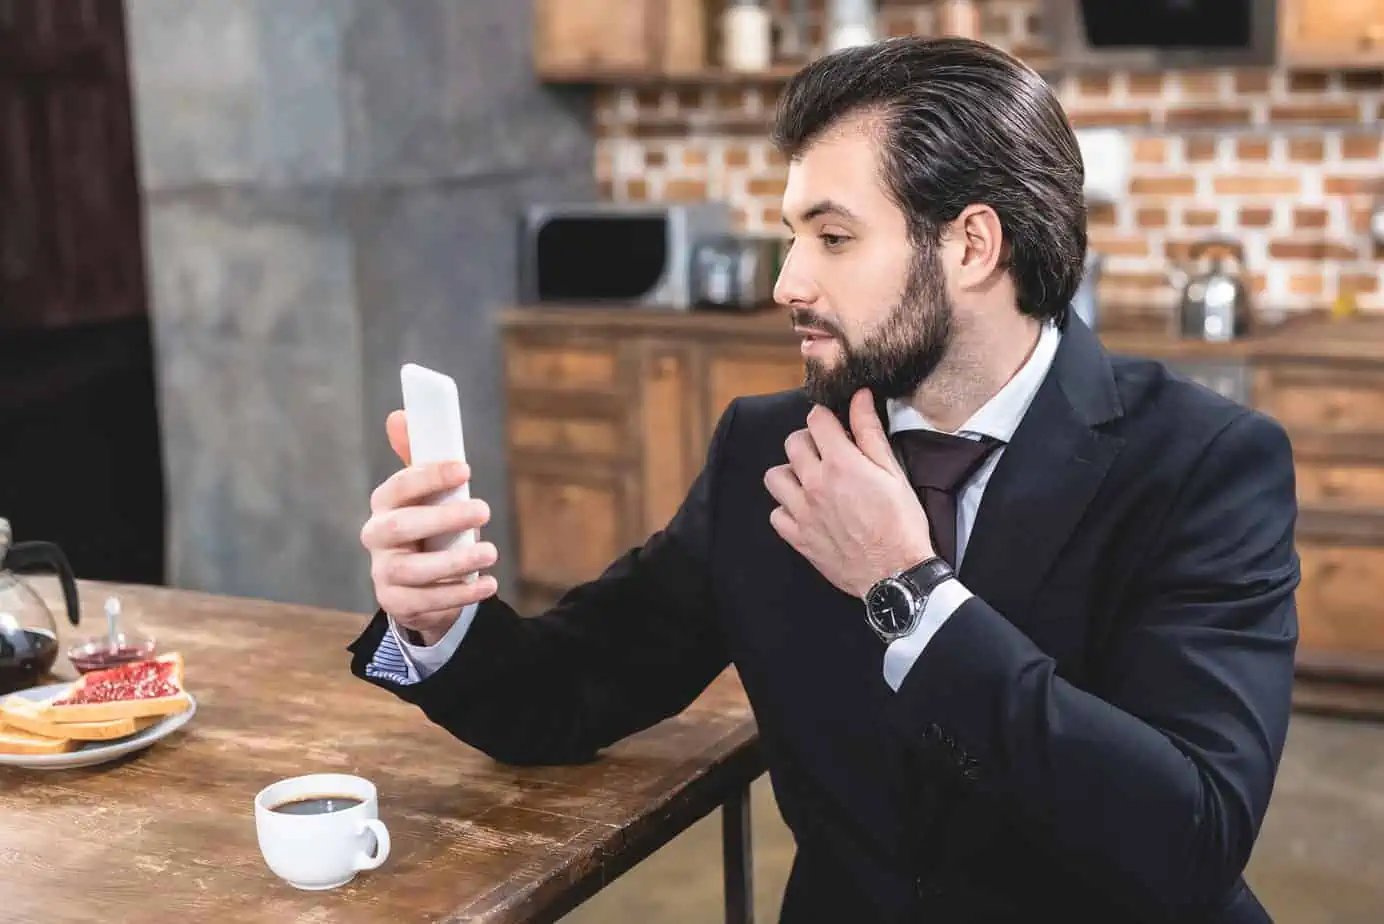 A man in a suit is looking at his cell phone